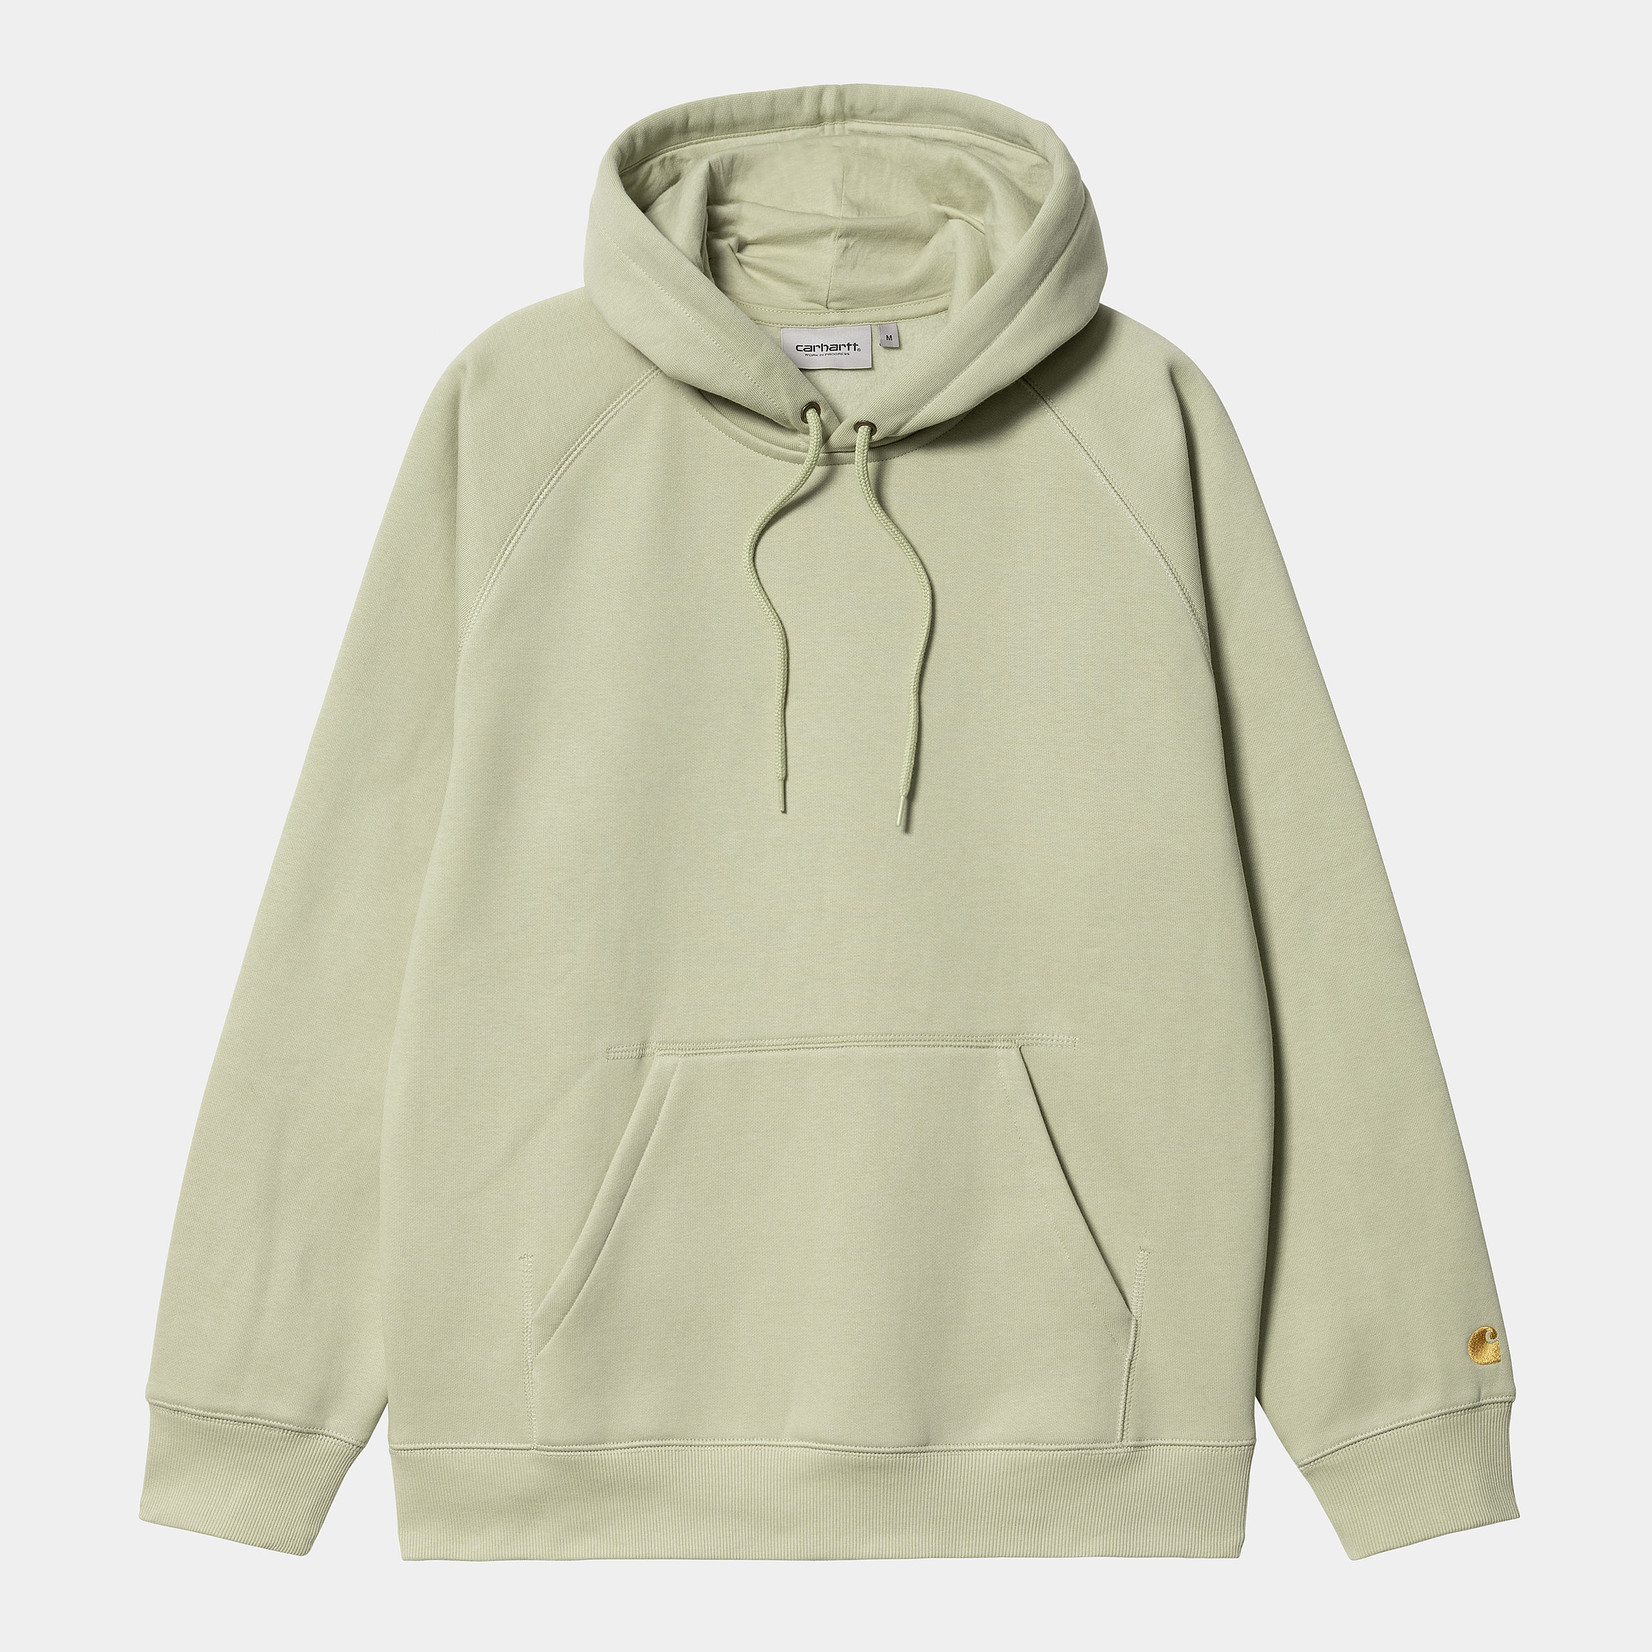 CARHARTT WIP HOODED CHASE SWEAT SS23